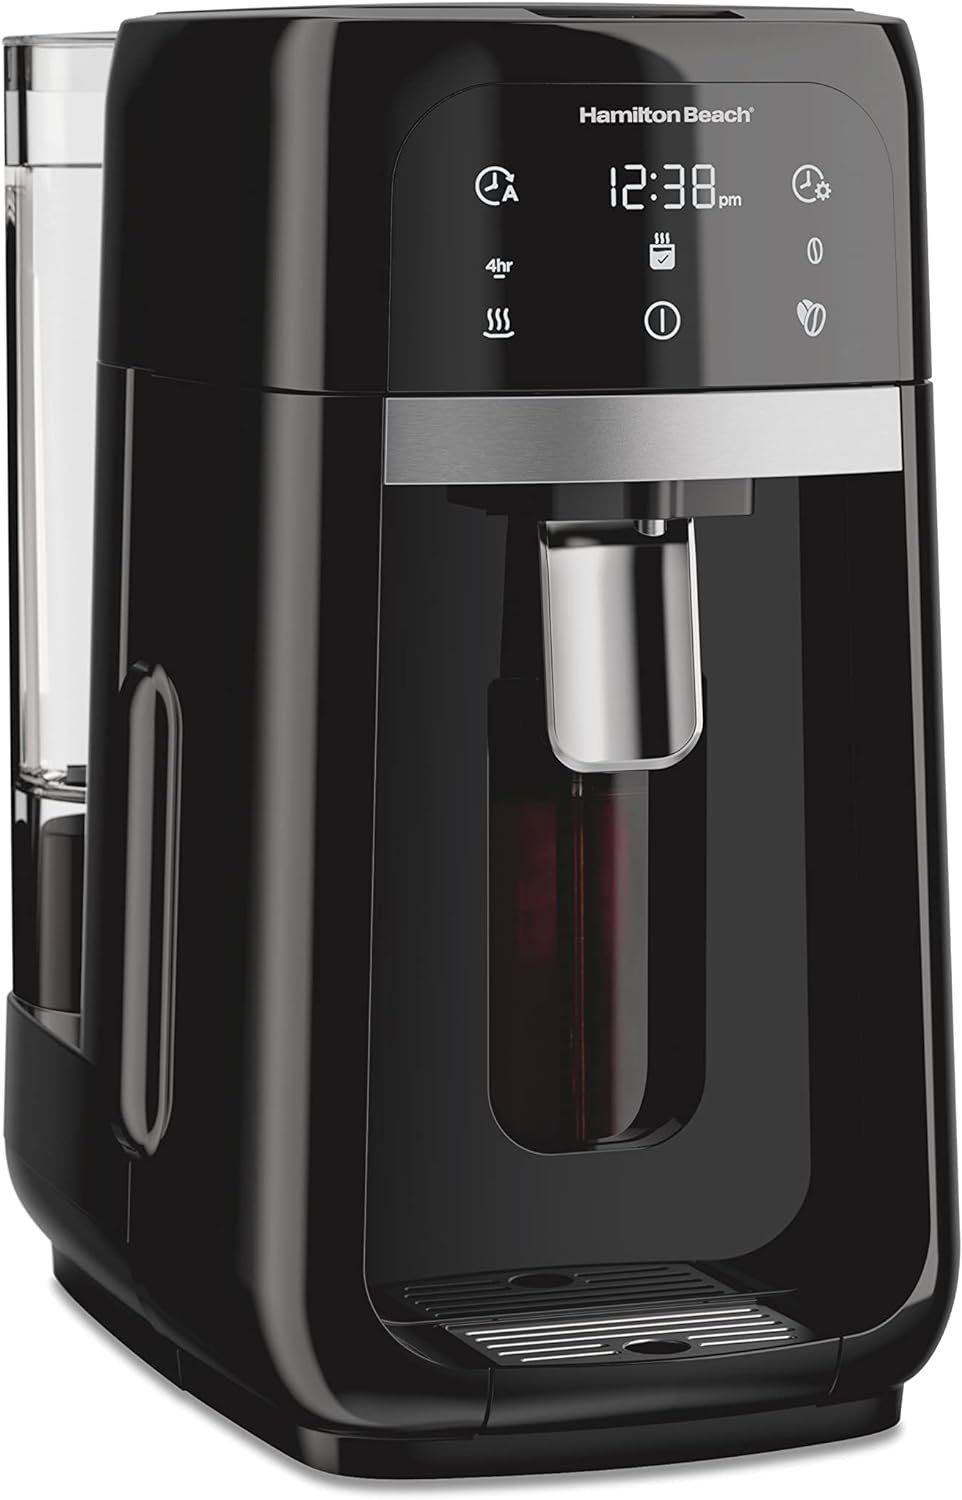 Hamilton Beach One Press Programmable Dispensing Drip Coffee Maker with 14 Cup Internal Brew Pot, Removable Water Reservoir, Black  Stainless Next Gen (47601)